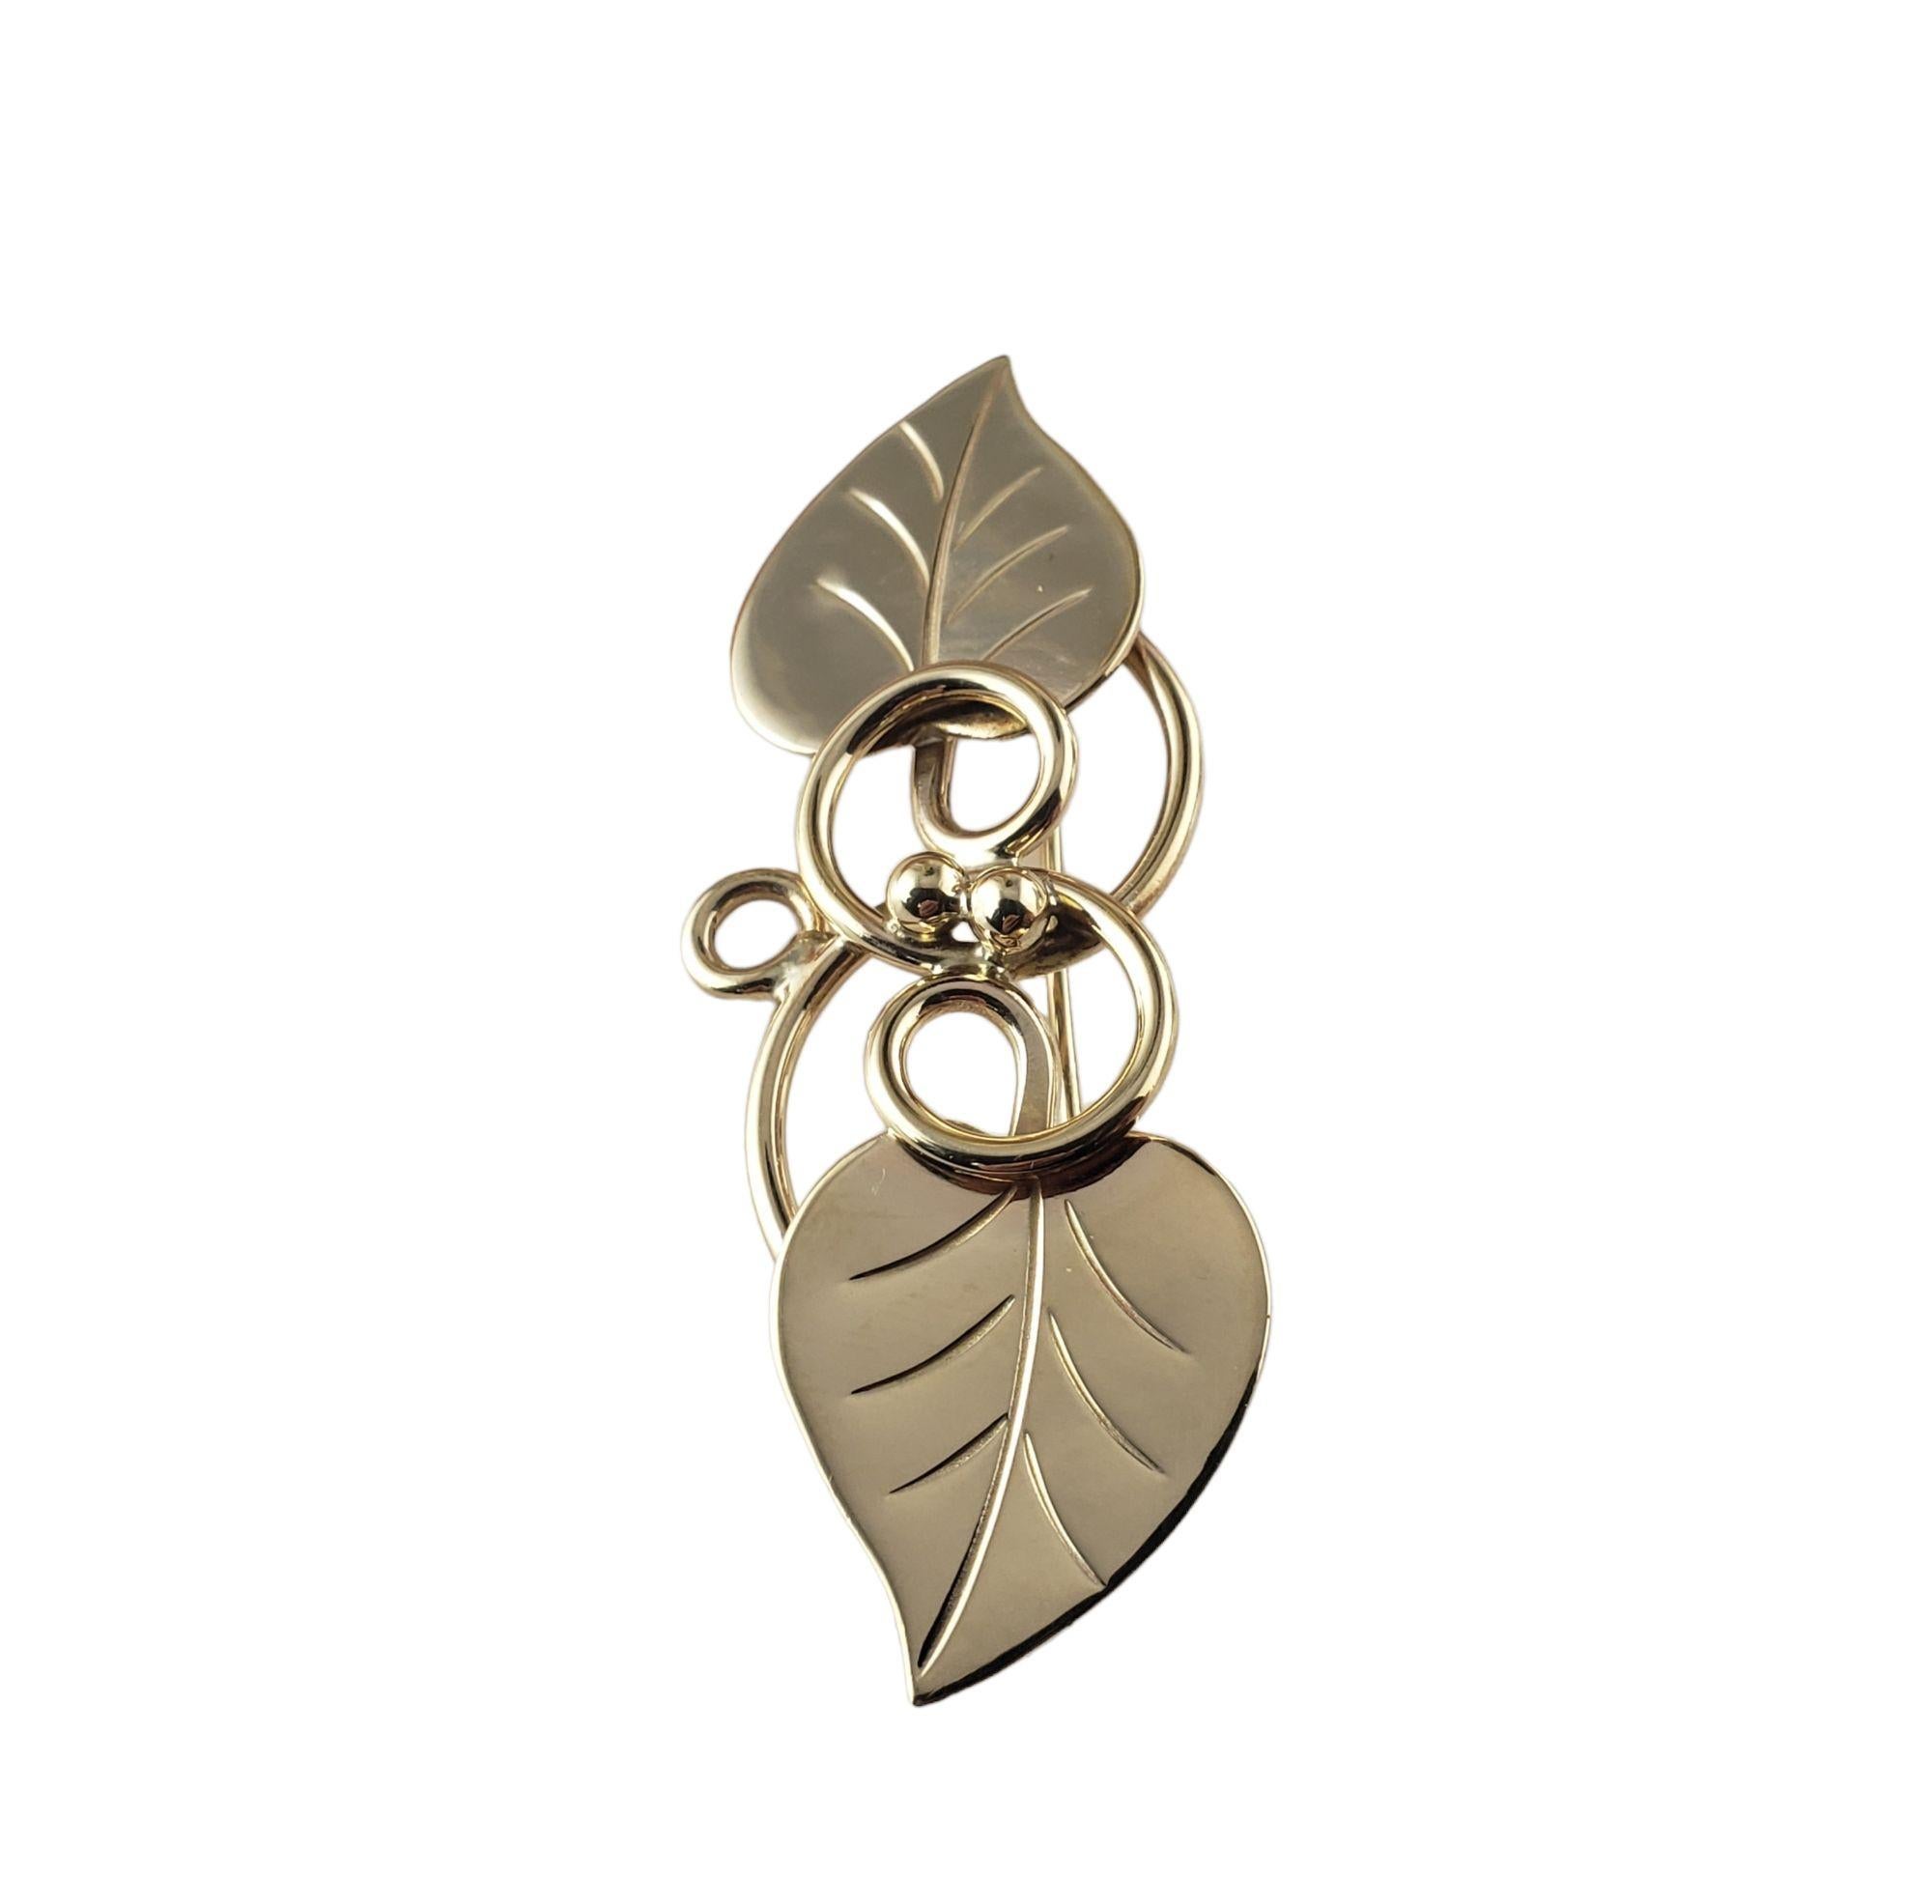 Vintage Georg Jensen 14 Karat Yellow Gold Brooch/Pin-

This elegant leaf brooch by Georg Jensen is crafted in meticulously detailed 14K yellow gold.

Size: 56 mm x 18 mm

Weight:   8.8 gr./  5.6 dwt.

Hallmark:  George Jensen Inc USA 14K

JAGi